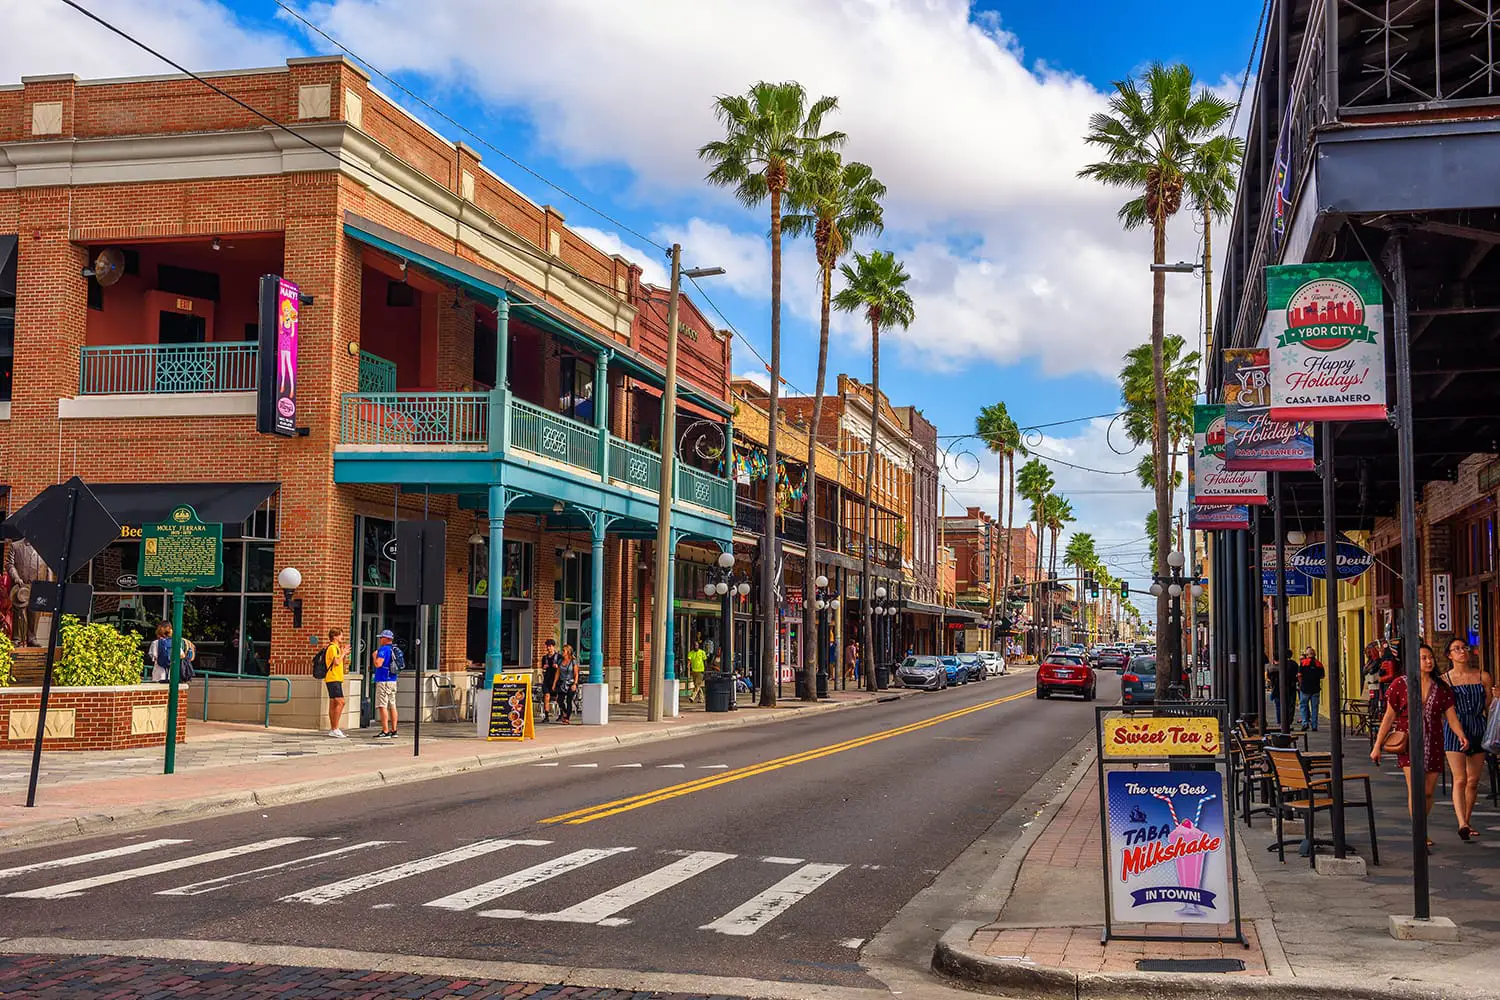 7th Avenue in the Historic Ybor City in Tampa, Florida